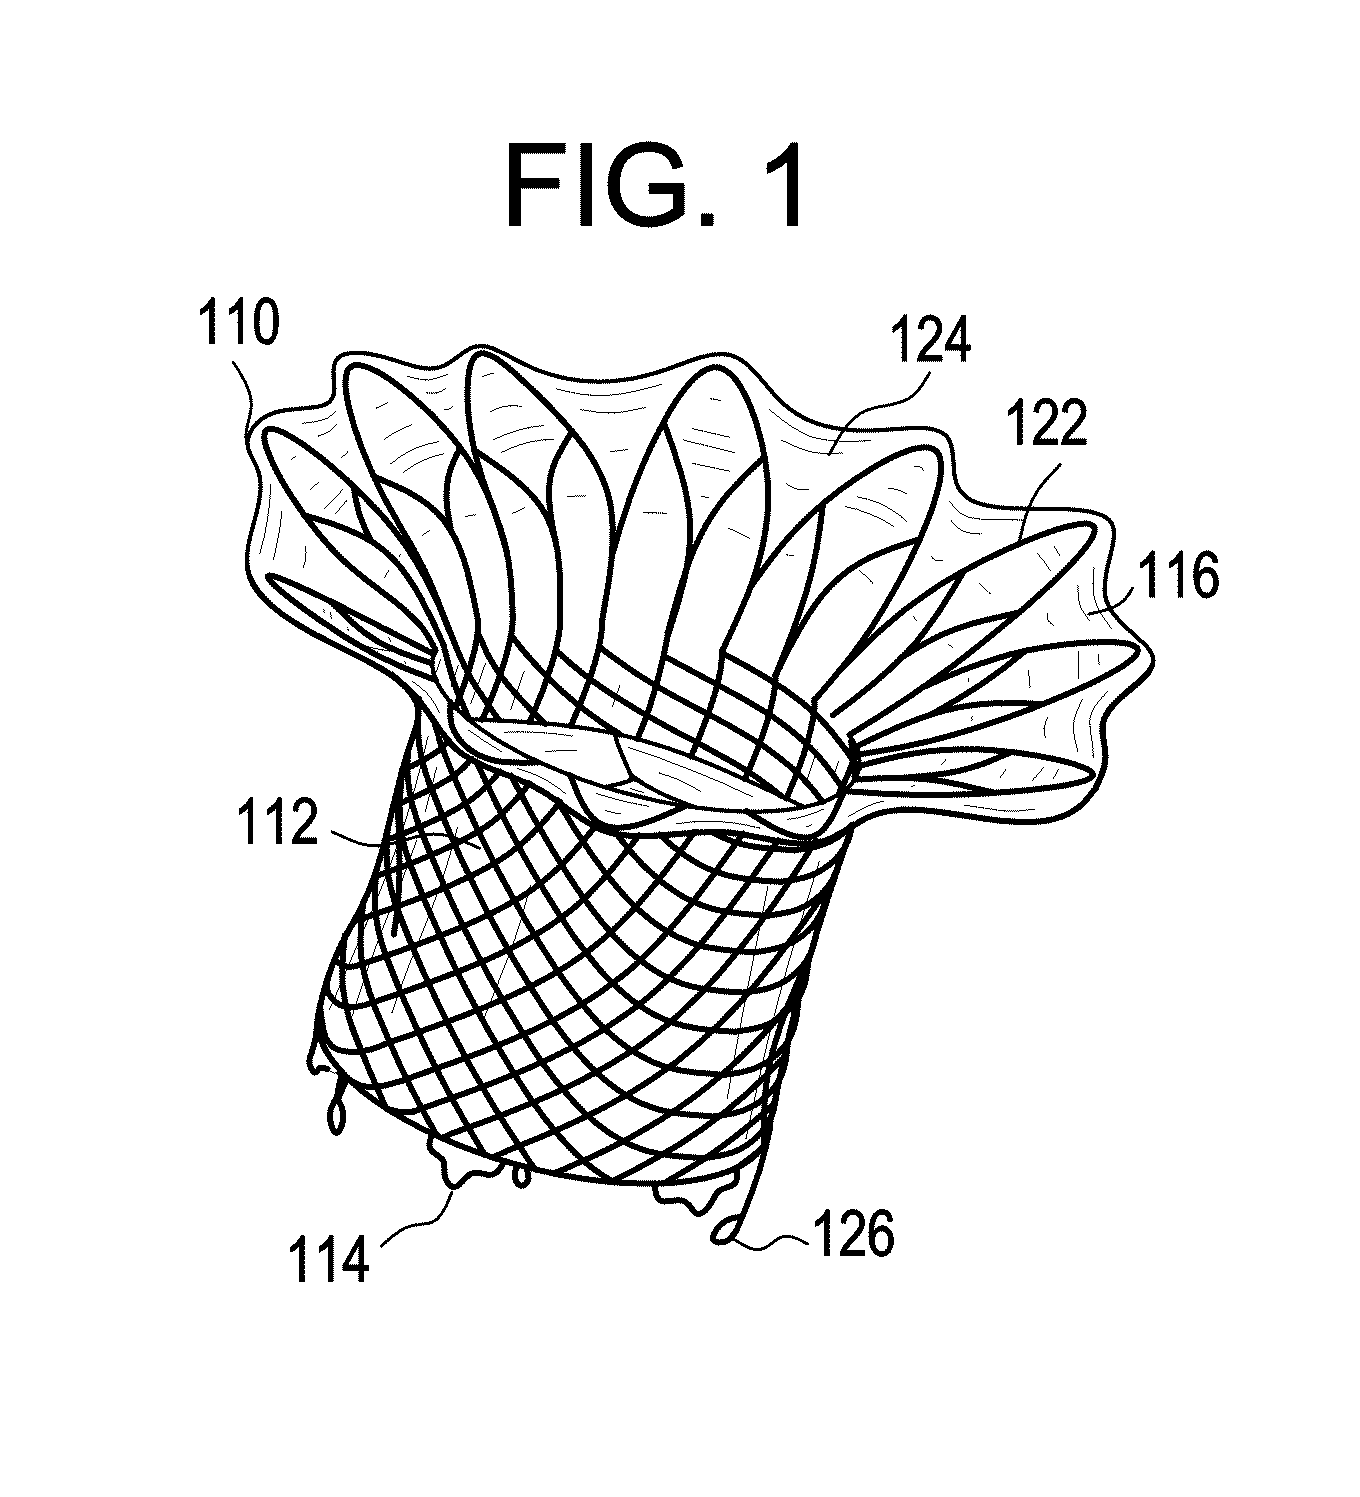 Device and System for Transcatheter Mitral Valve Replacement